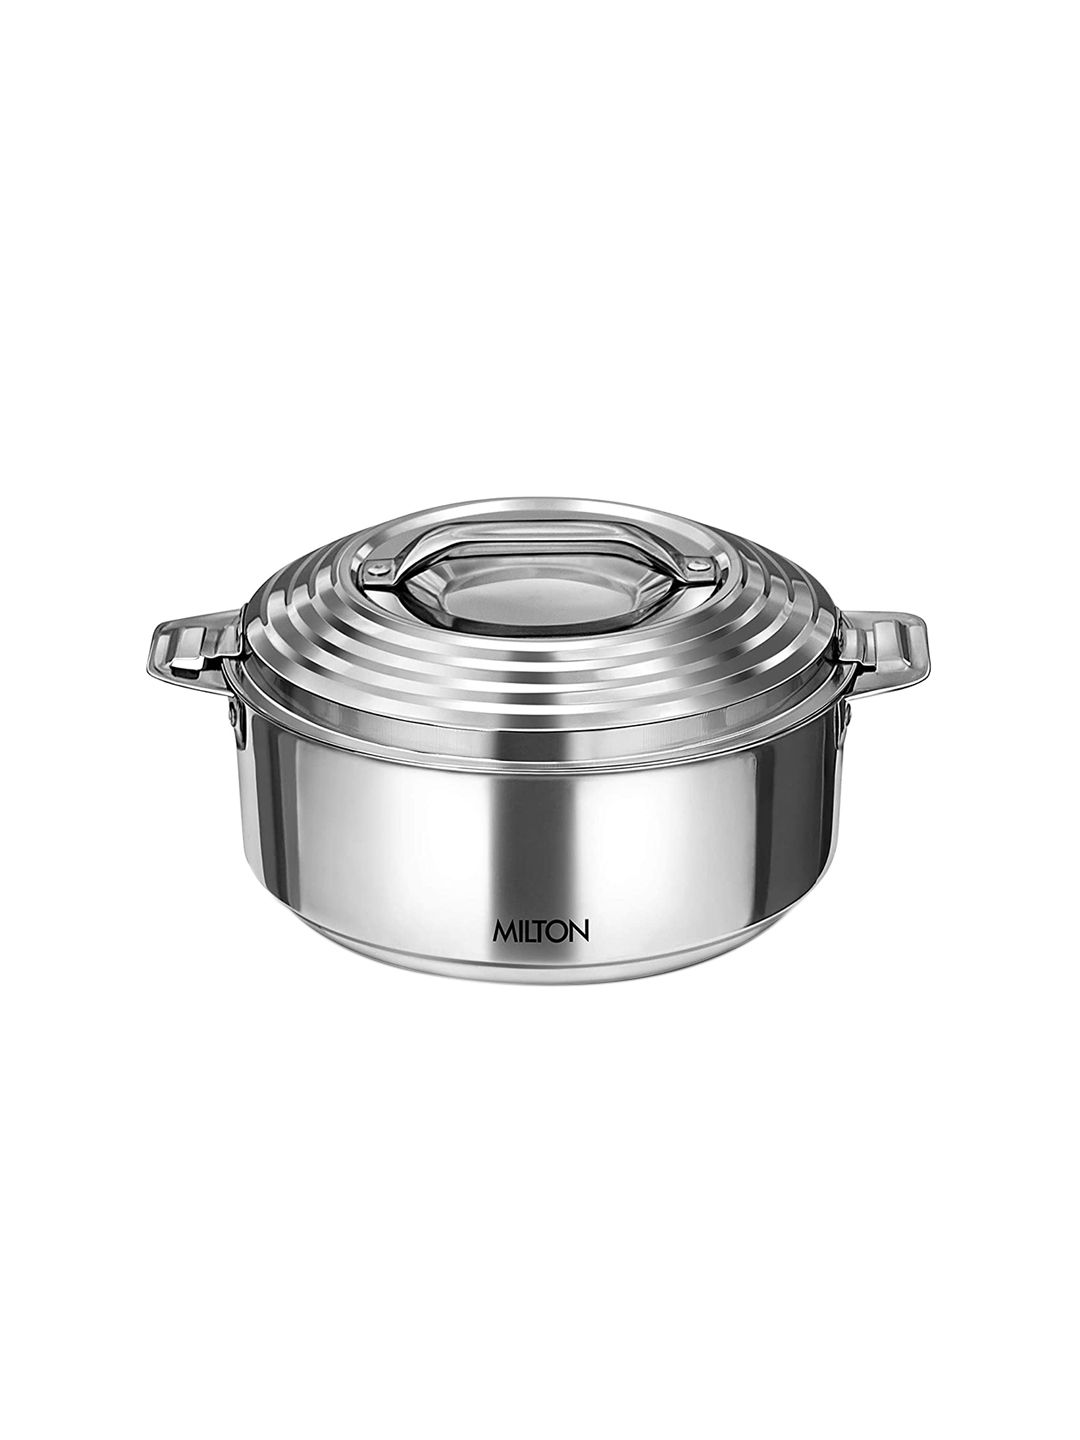 Milton Silver-Toned Stainless Steel Galaxia Casserole Price in India